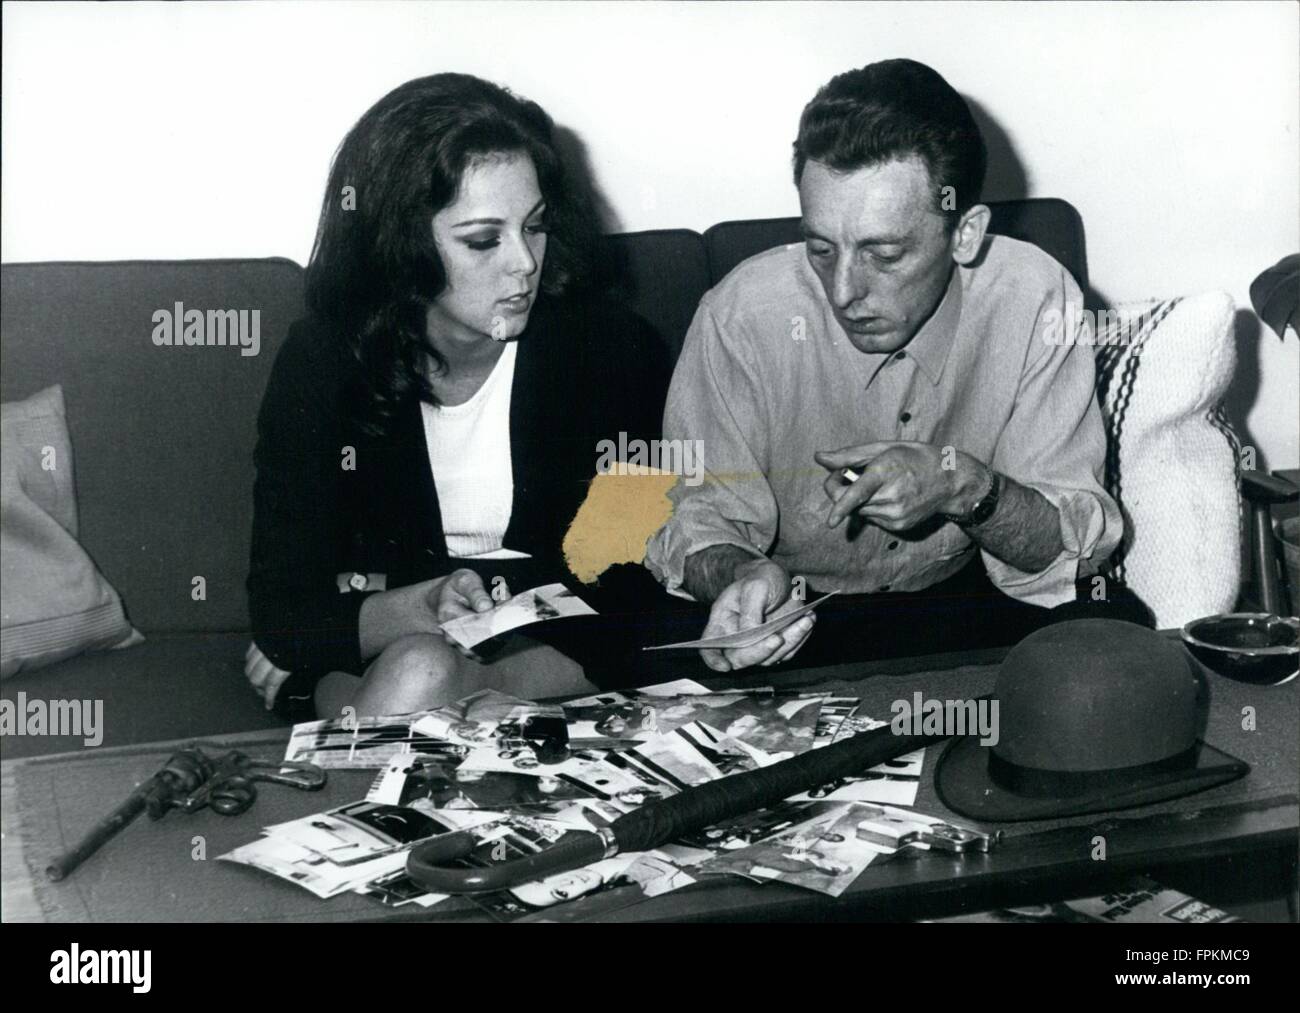 1969 - Heinz Browers makes the German ''Emma Peel'', Friedel Frank, he is an very good publicity manager in Germany. © Keystone Pictures USA/ZUMAPRESS.com/Alamy Live News Stock Photo